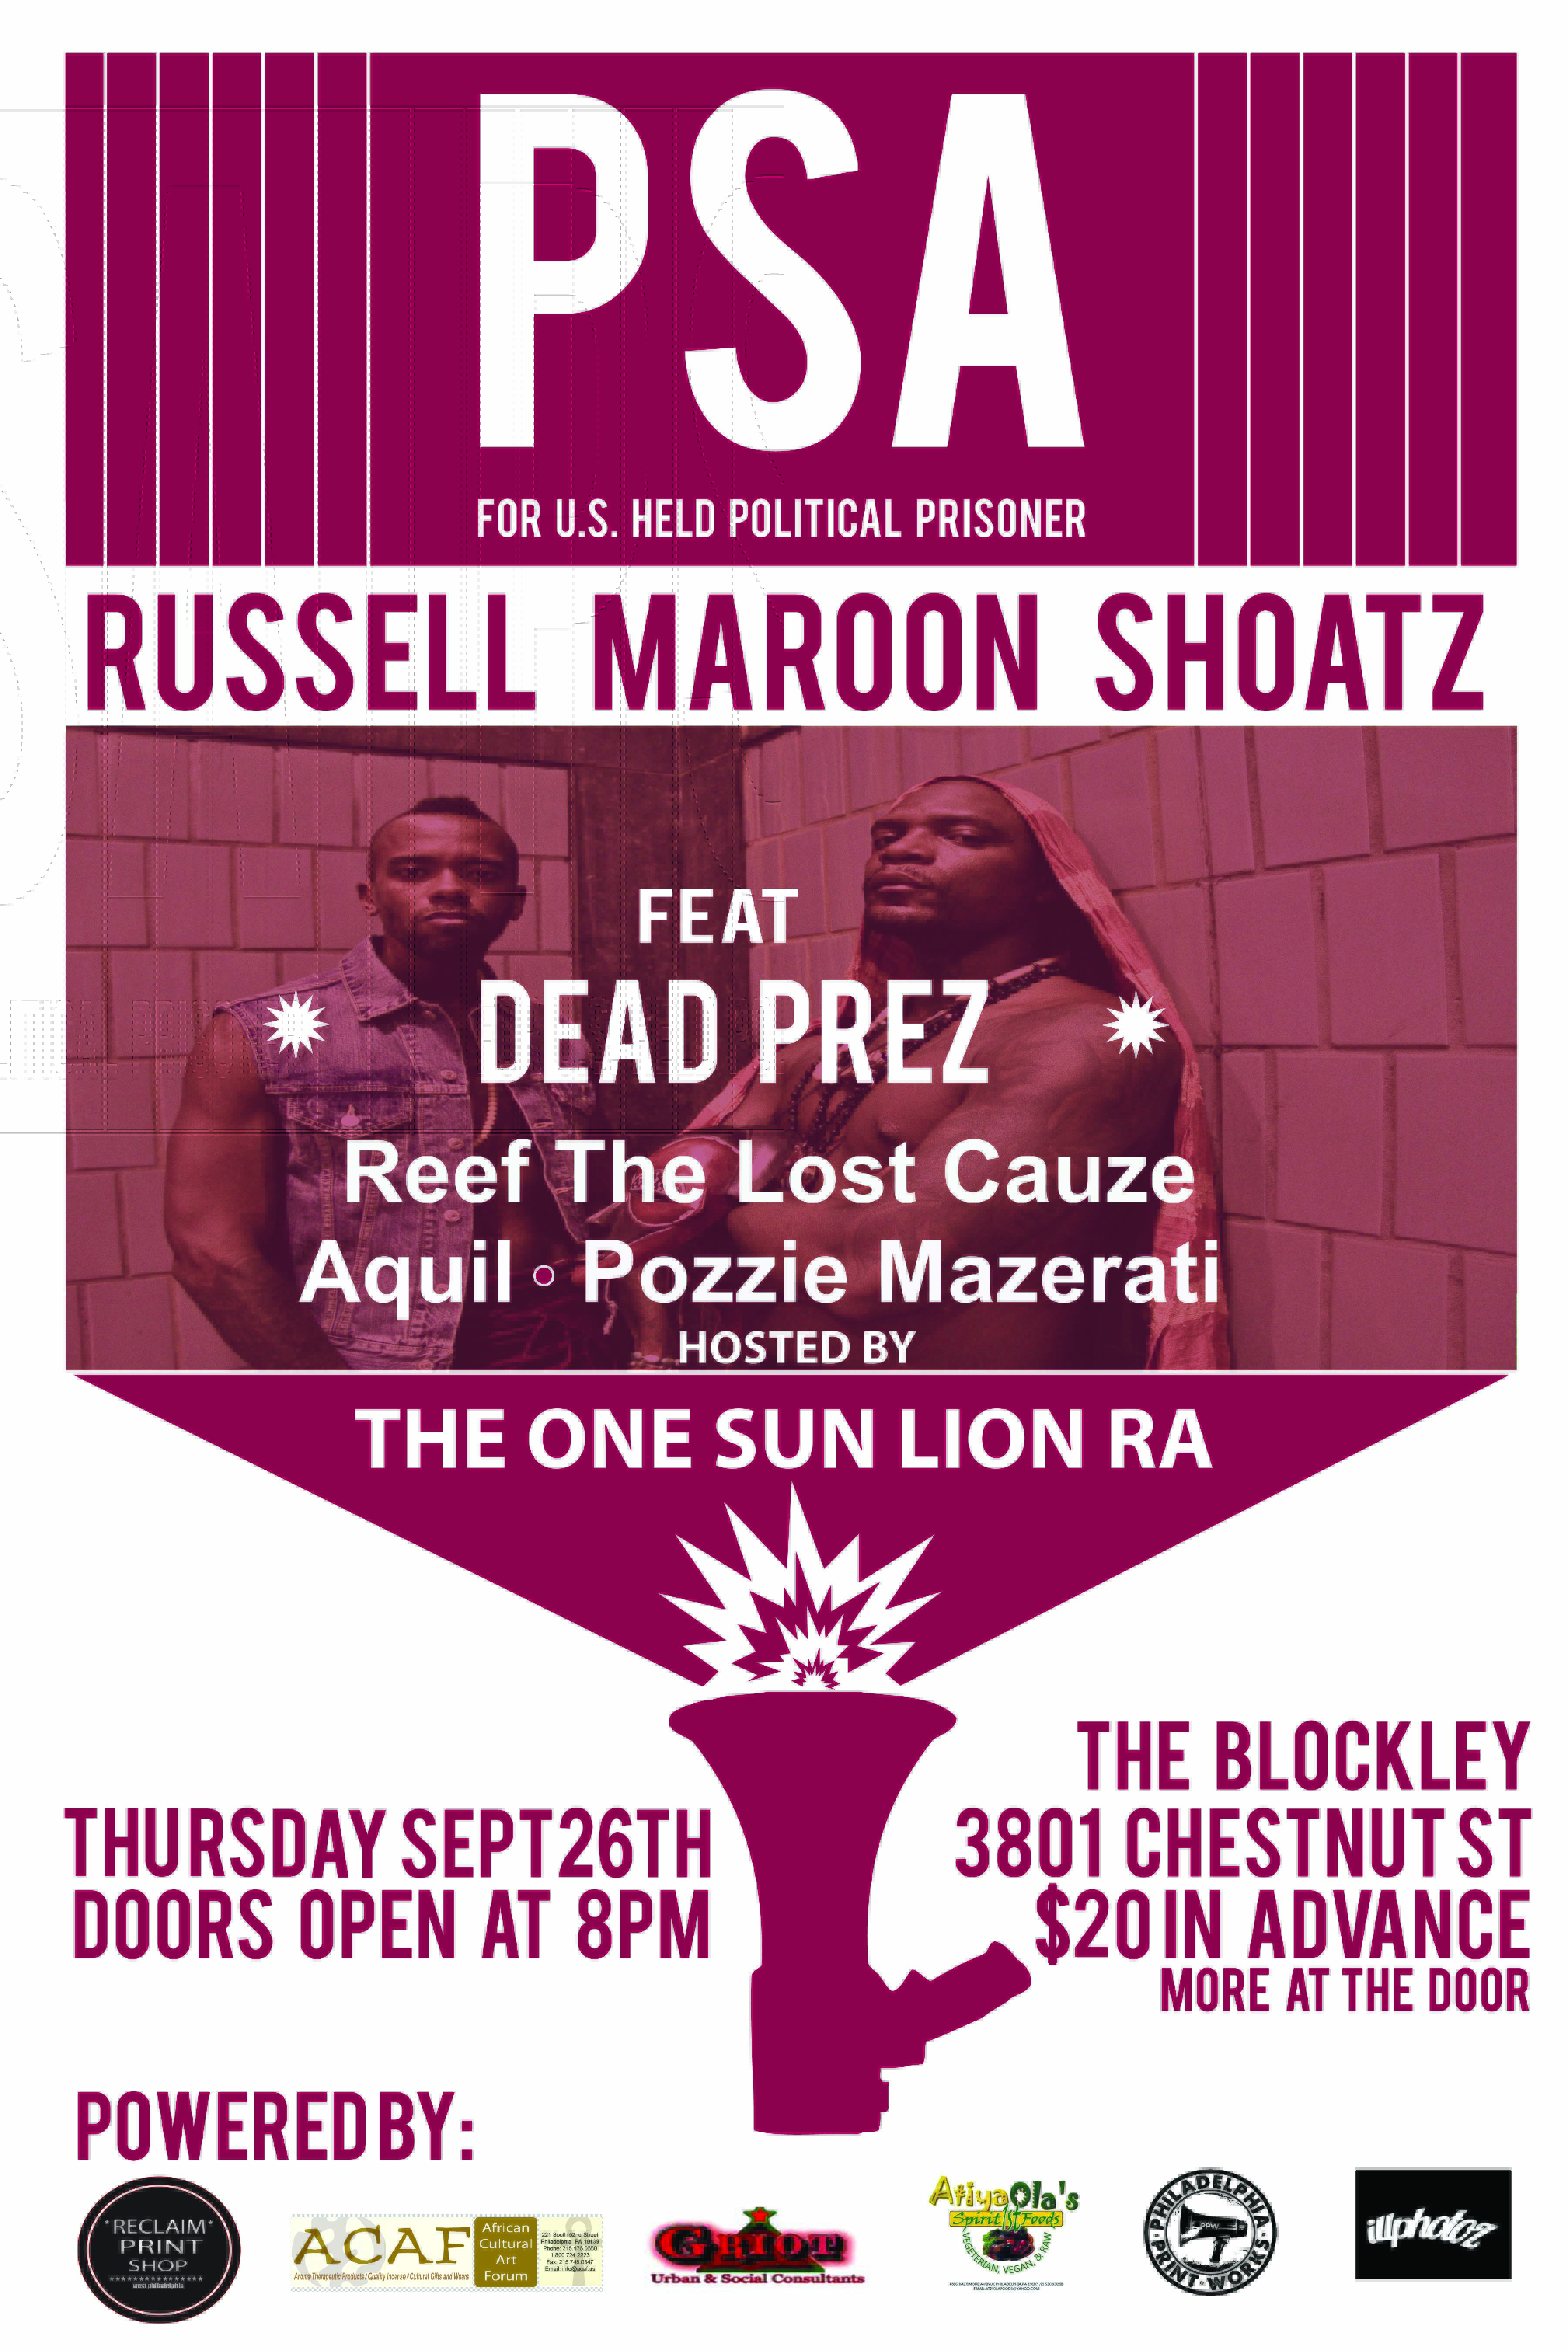 dead-prez-performs-live-at-the-blockley-92613-HHS1987-2013 Dead Prez Performs Live at The Blockley, 9/26/13  